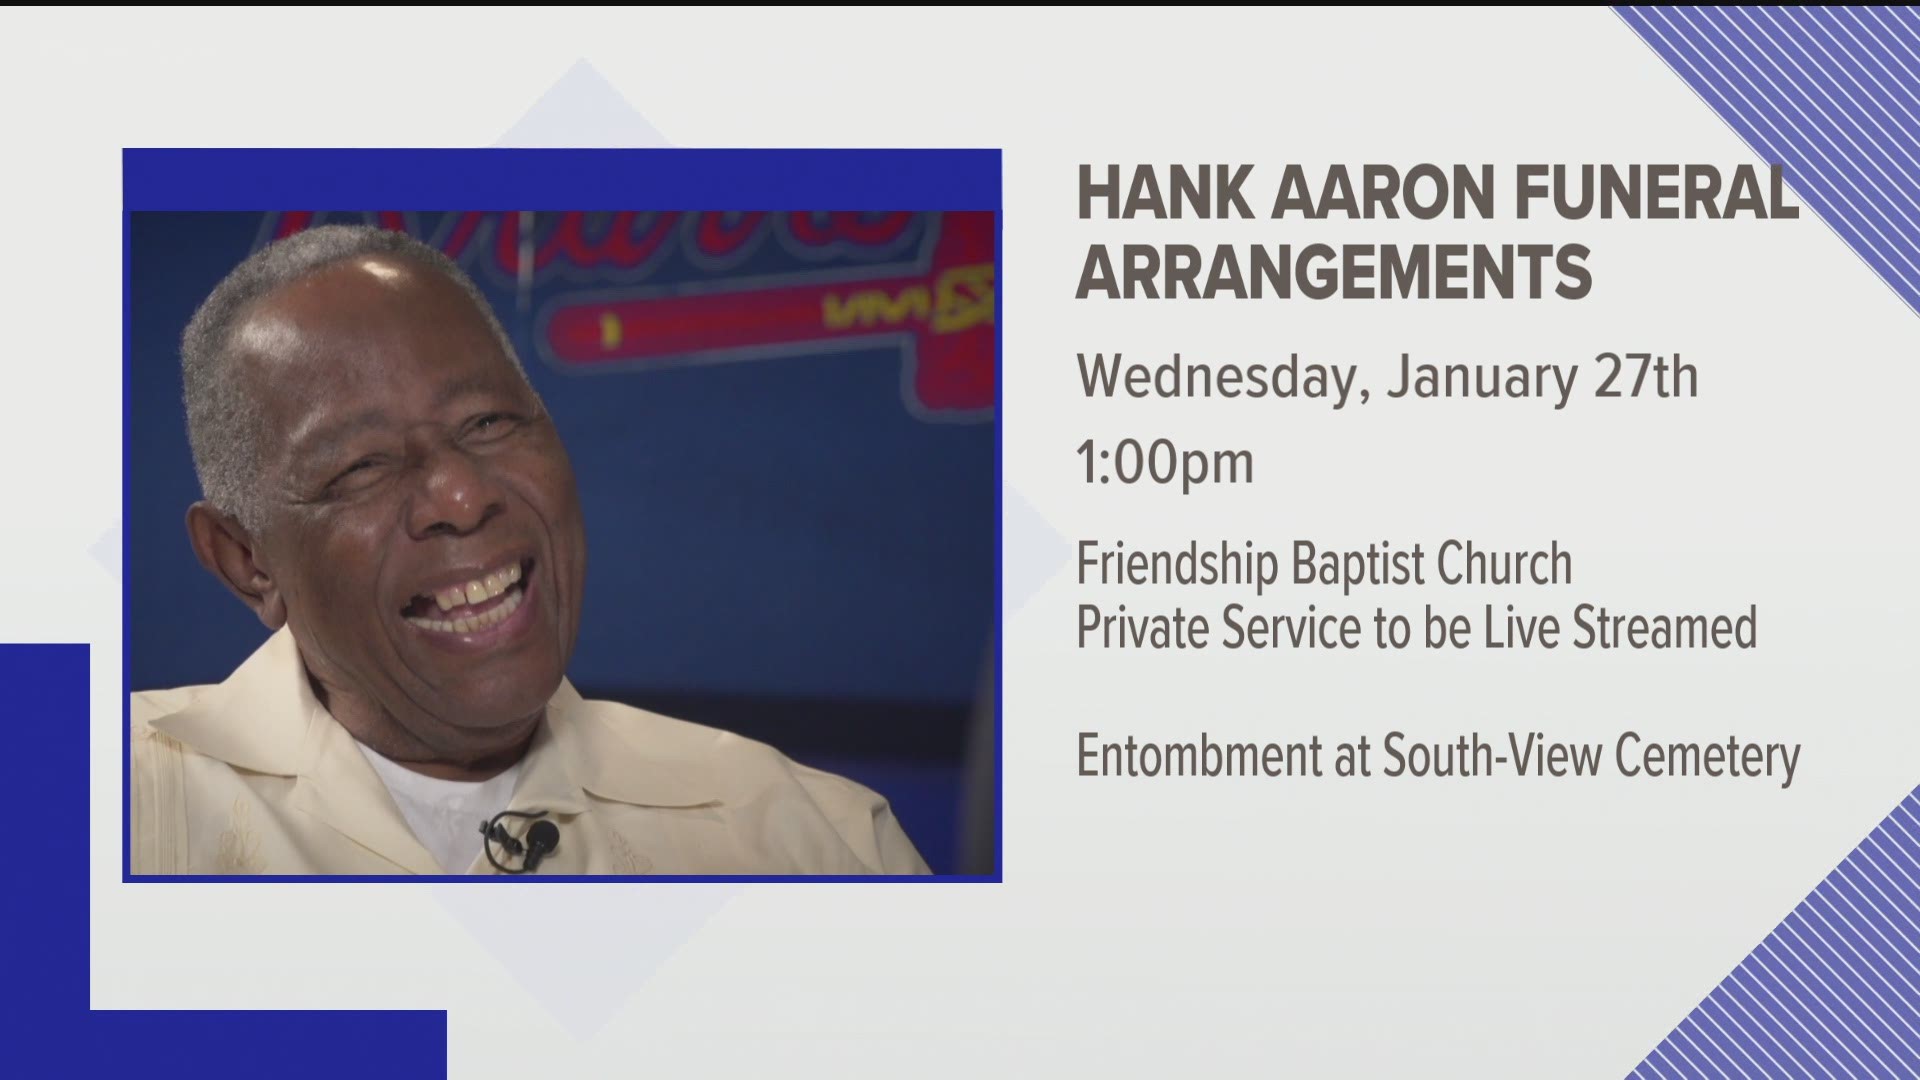 A well-known Atlanta funeral home has released new details on how baseball and Atlanta legend Hank Aaron will be remembered in the coming days.